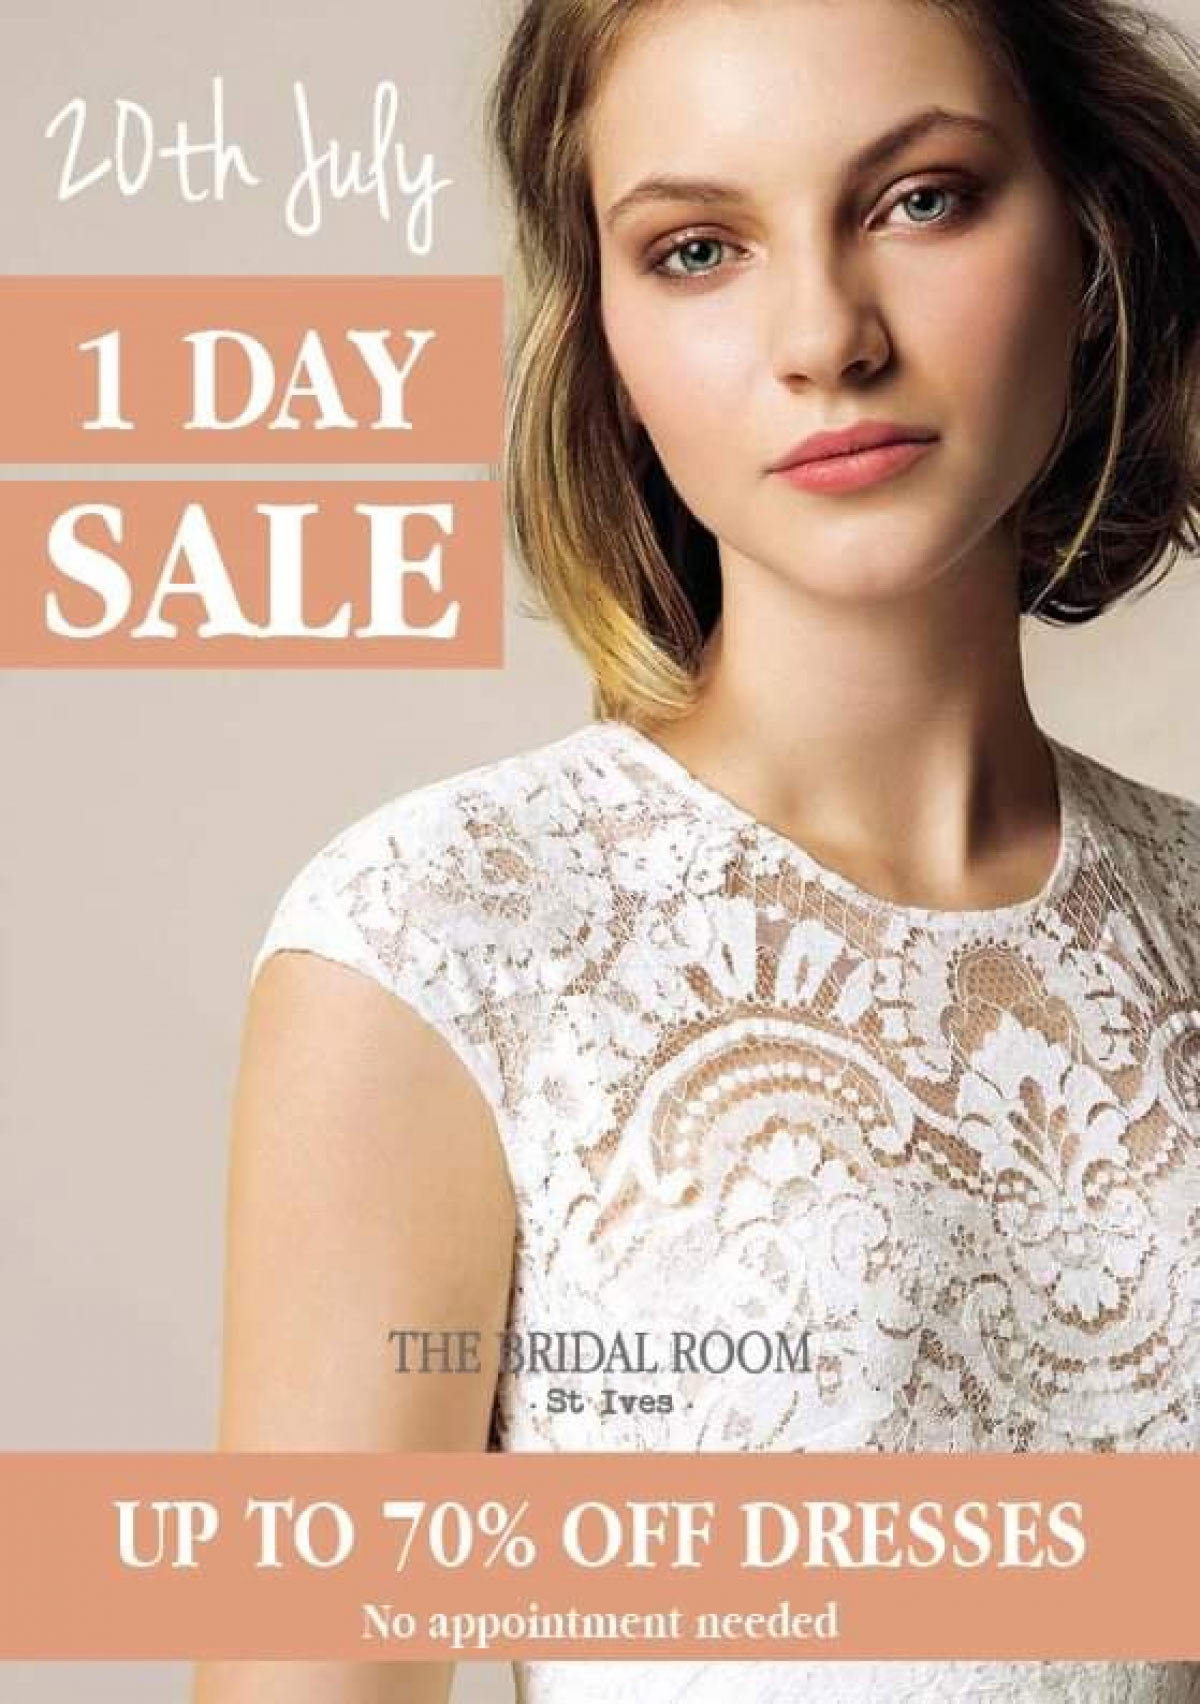 Sale day spectacular at The Bridal Room St Ives